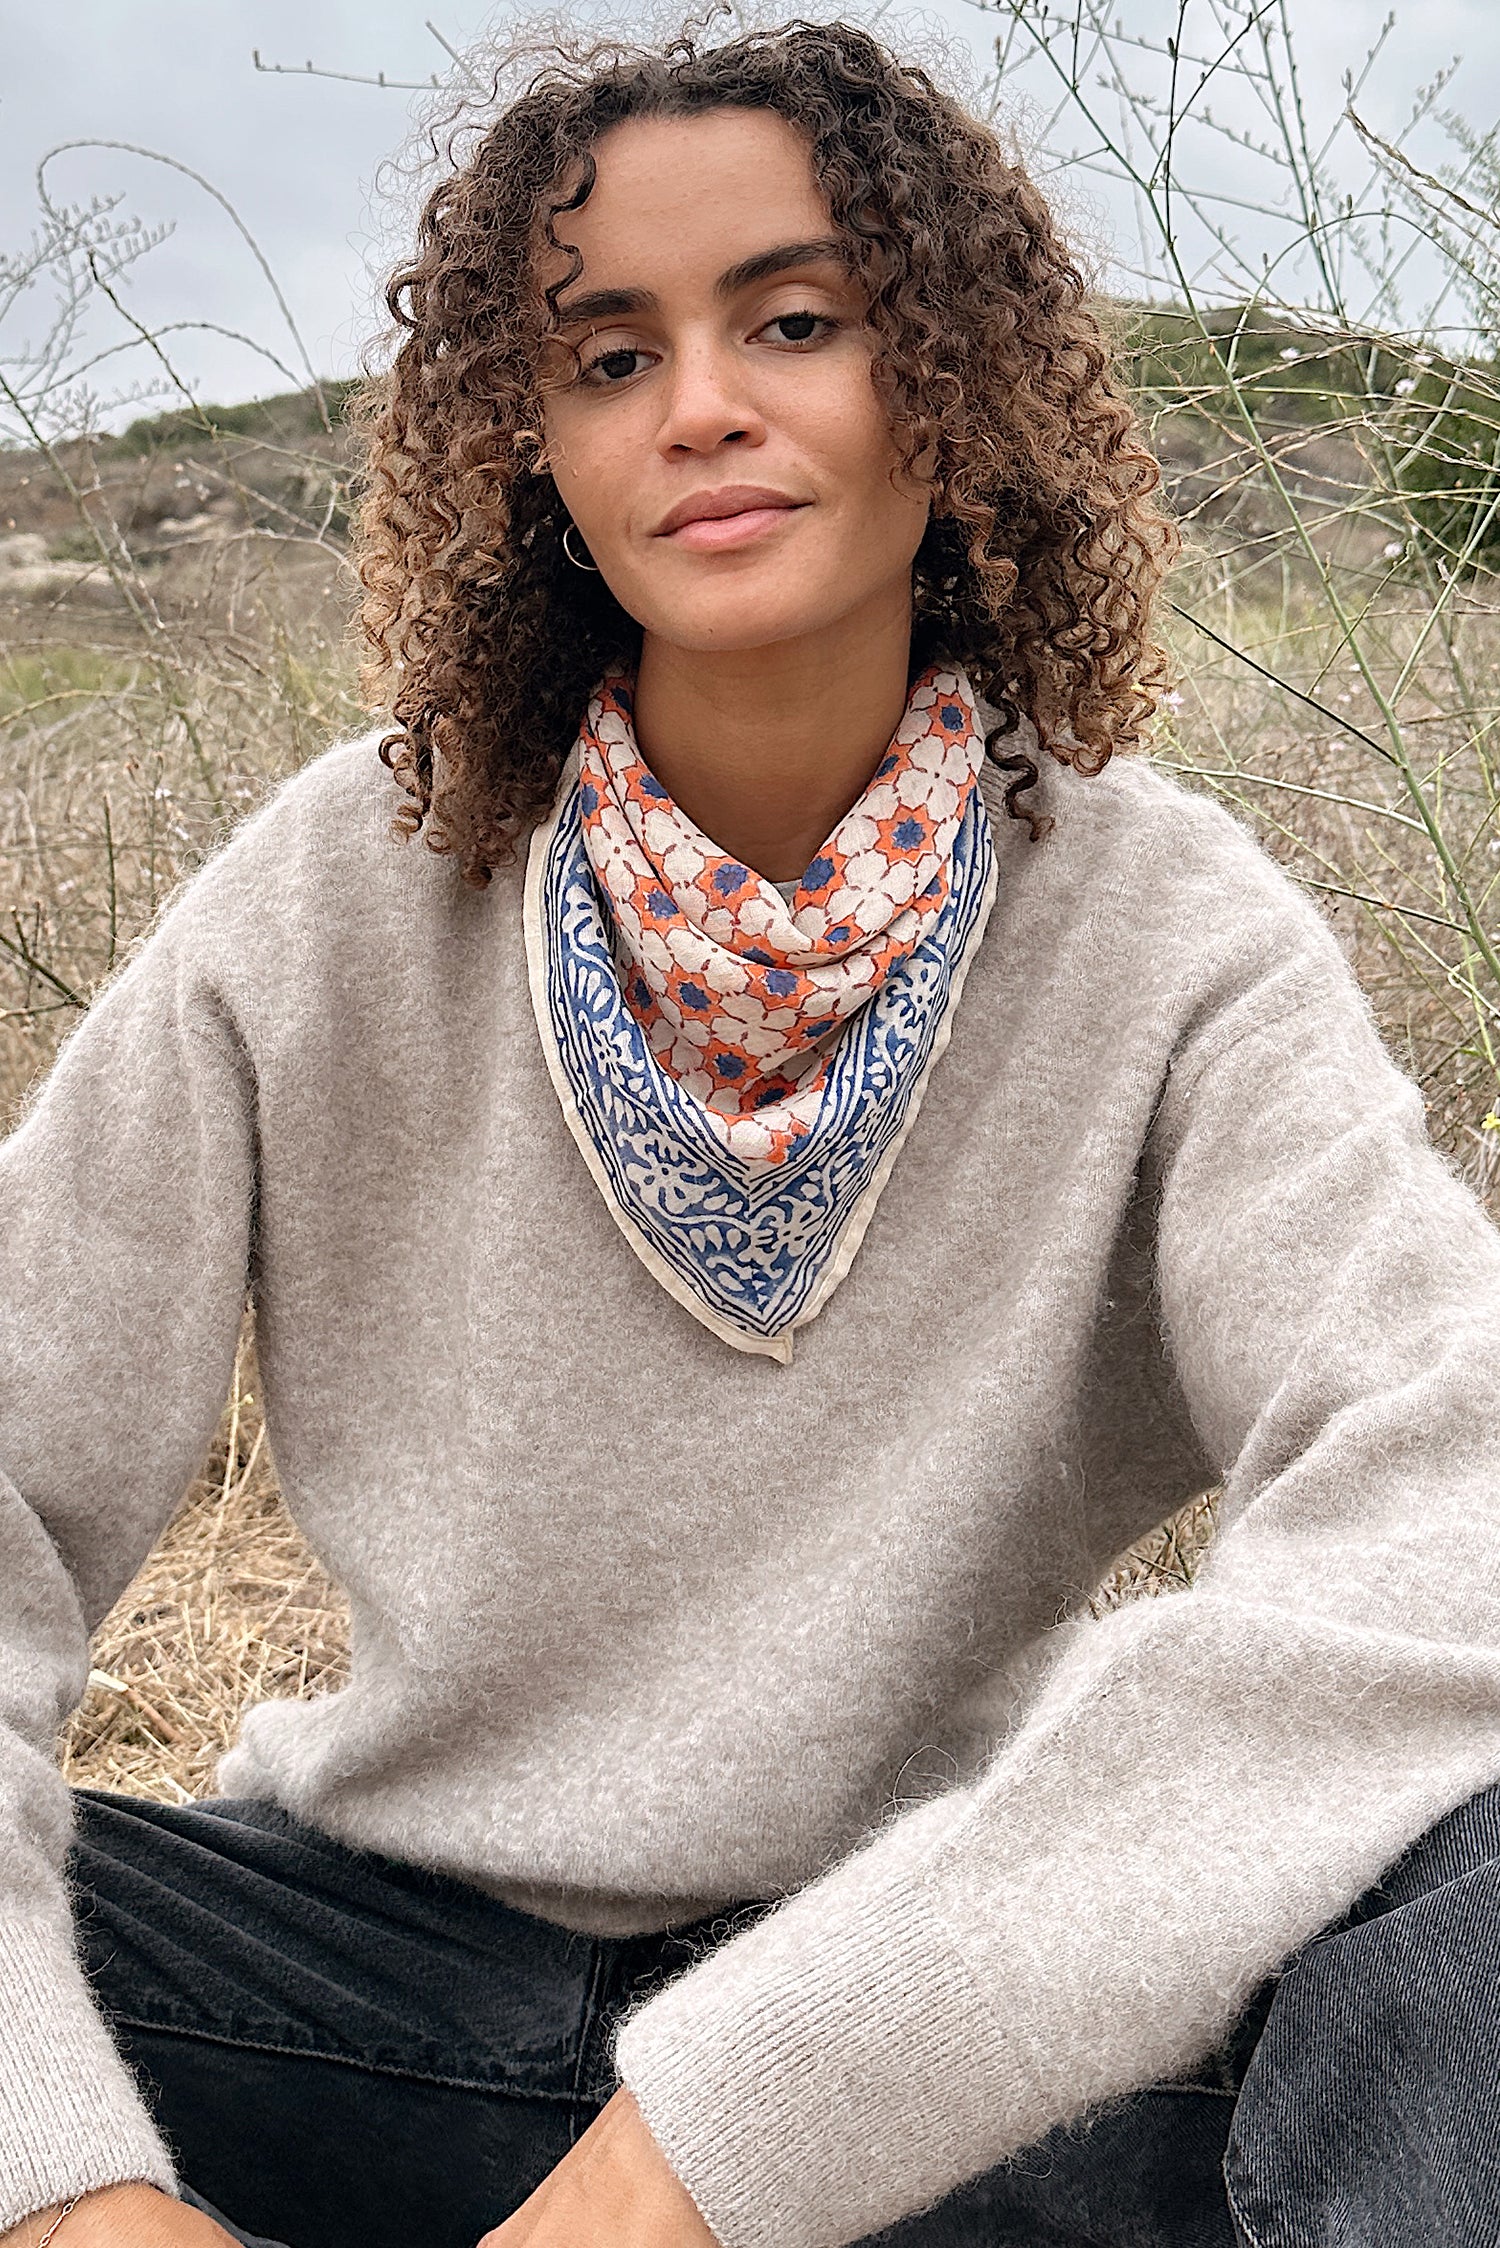 Woman wearing a tan sweater, black jeans, sitting in a field, with the block print Jane cotton bandana tied around her neck.